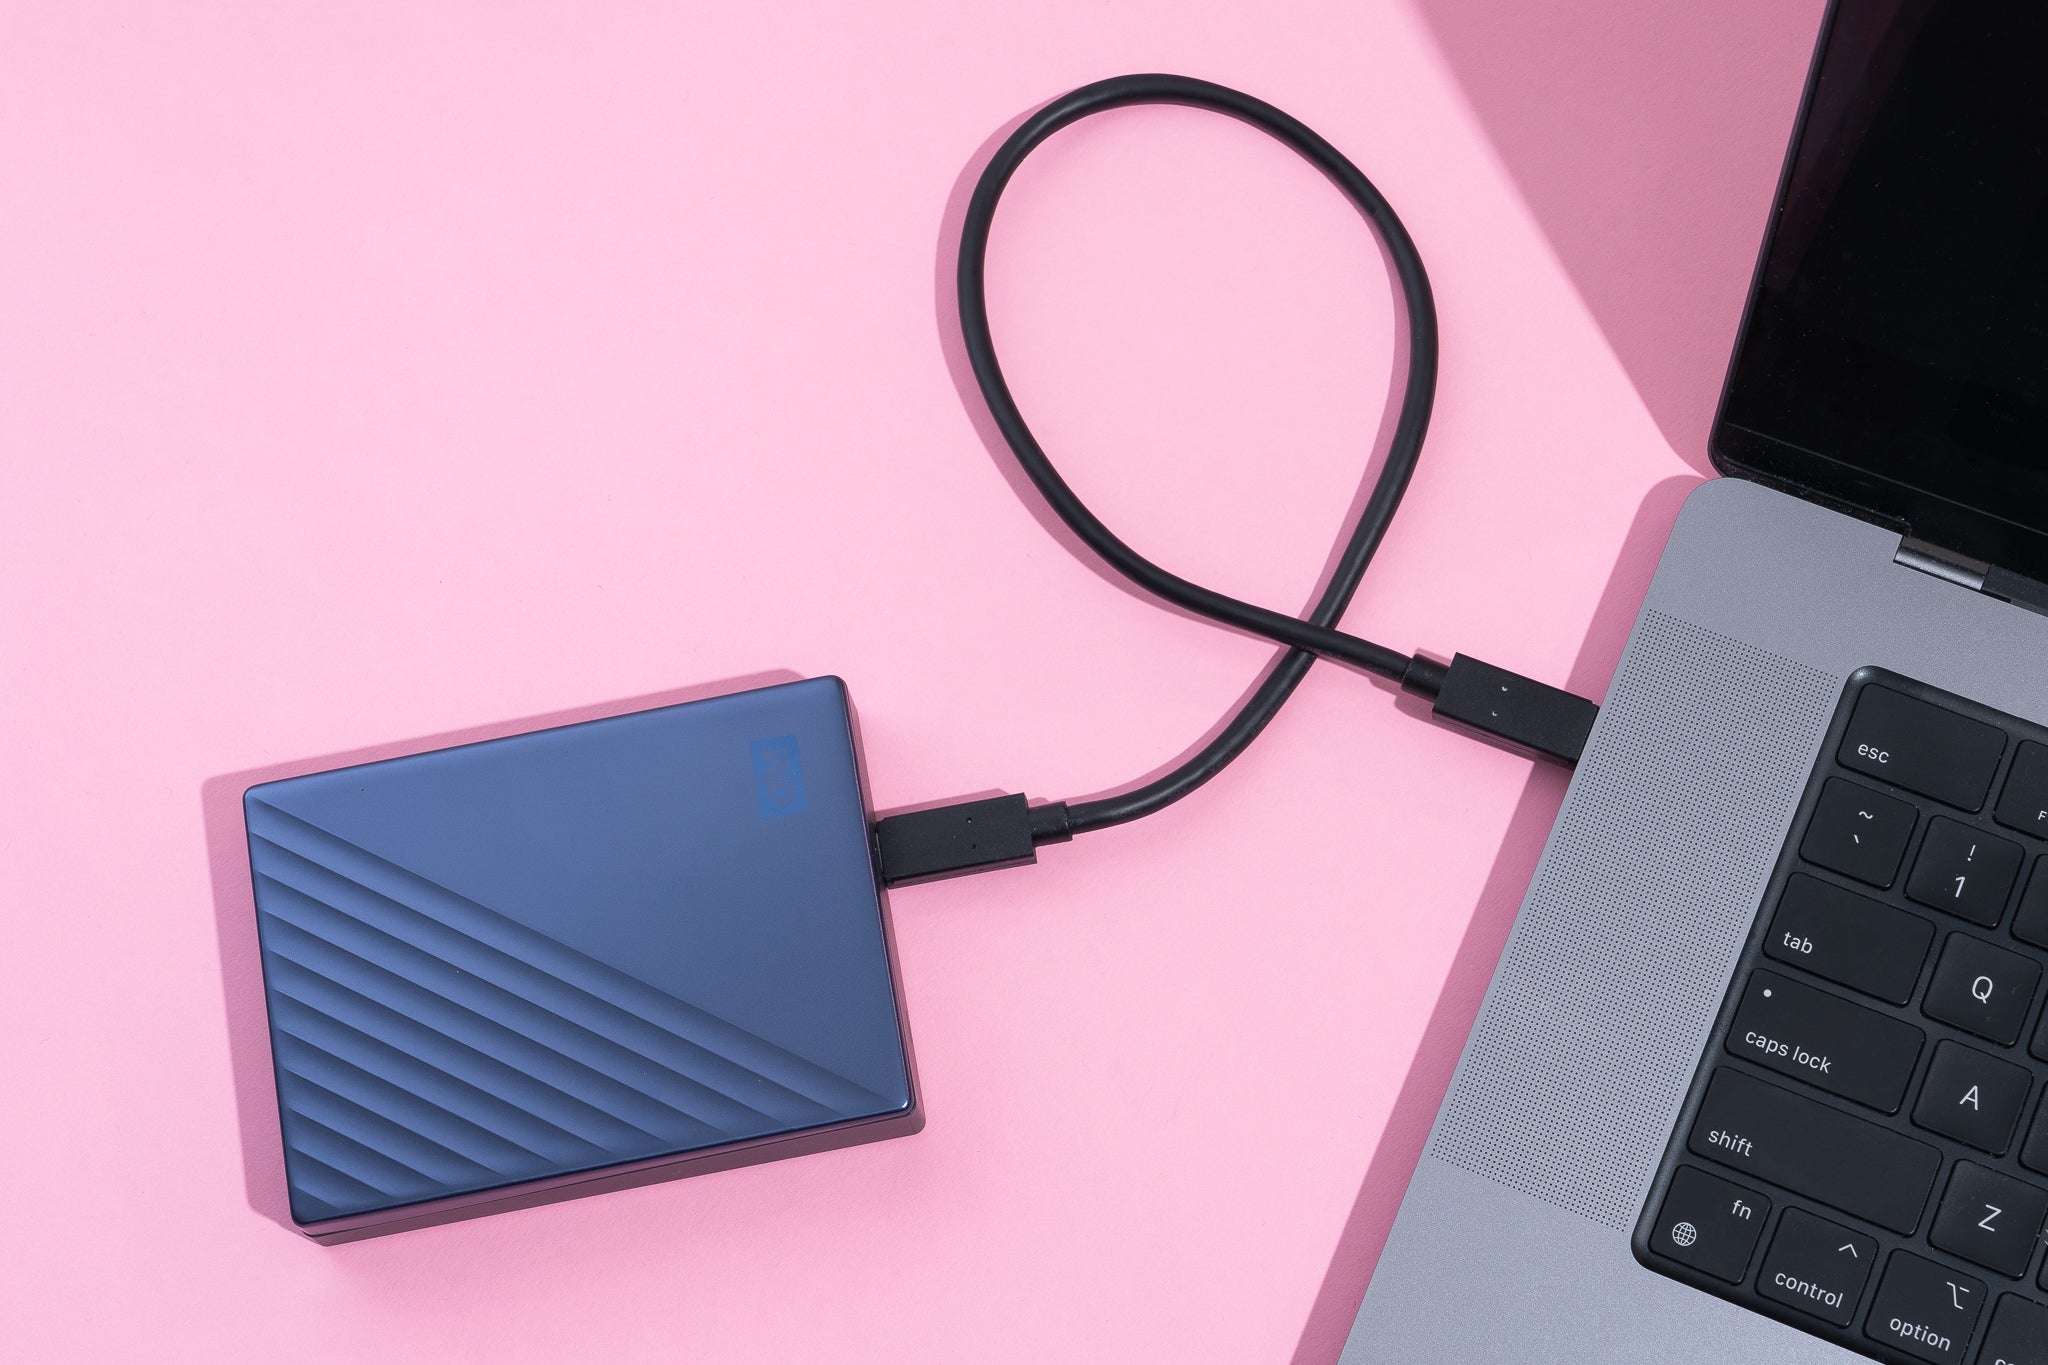 How To Download Files To External Hard Drive